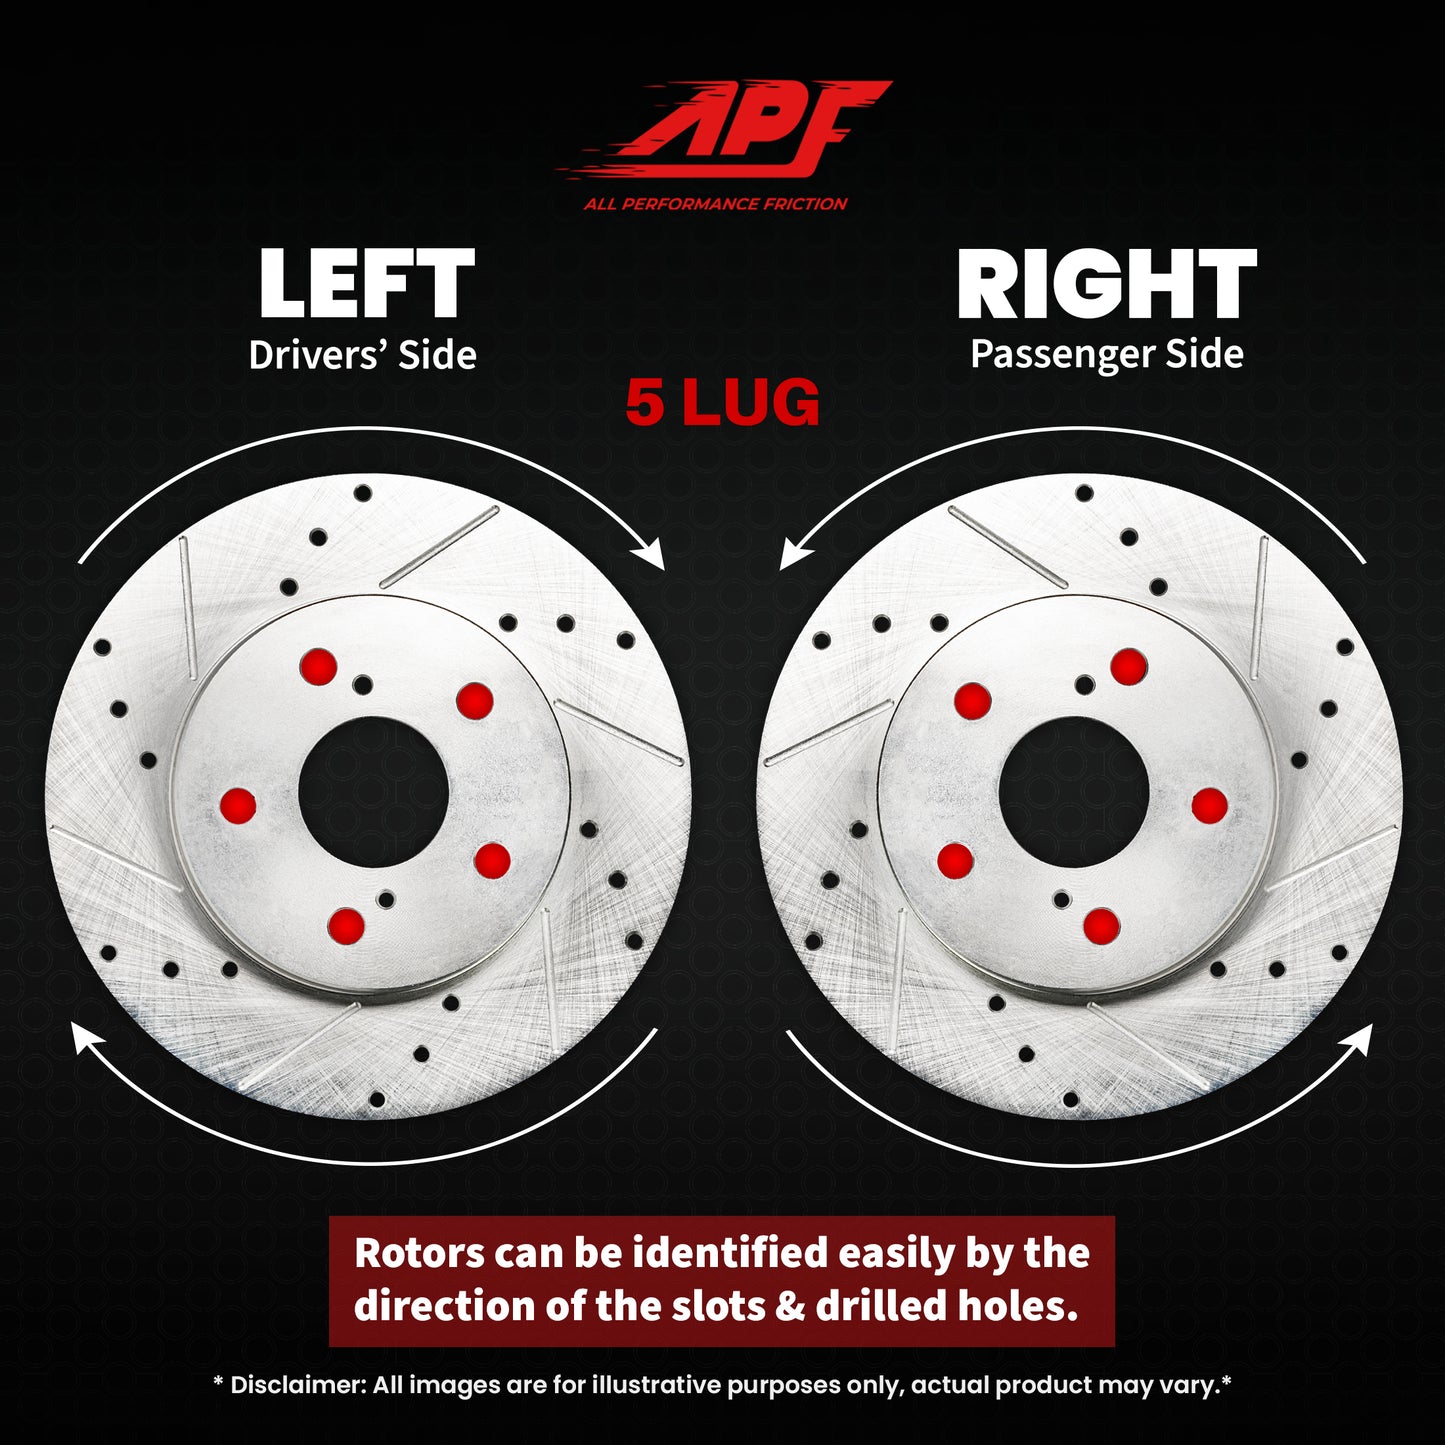 APF All Performance Friction Front and Rear Rotors and Pads Full Kit compatible with Jeep Compass 2007-2017 Zinc Drilled Slotted Rotors with Ceramic Carbon Fiber Brake Pads | $412.67